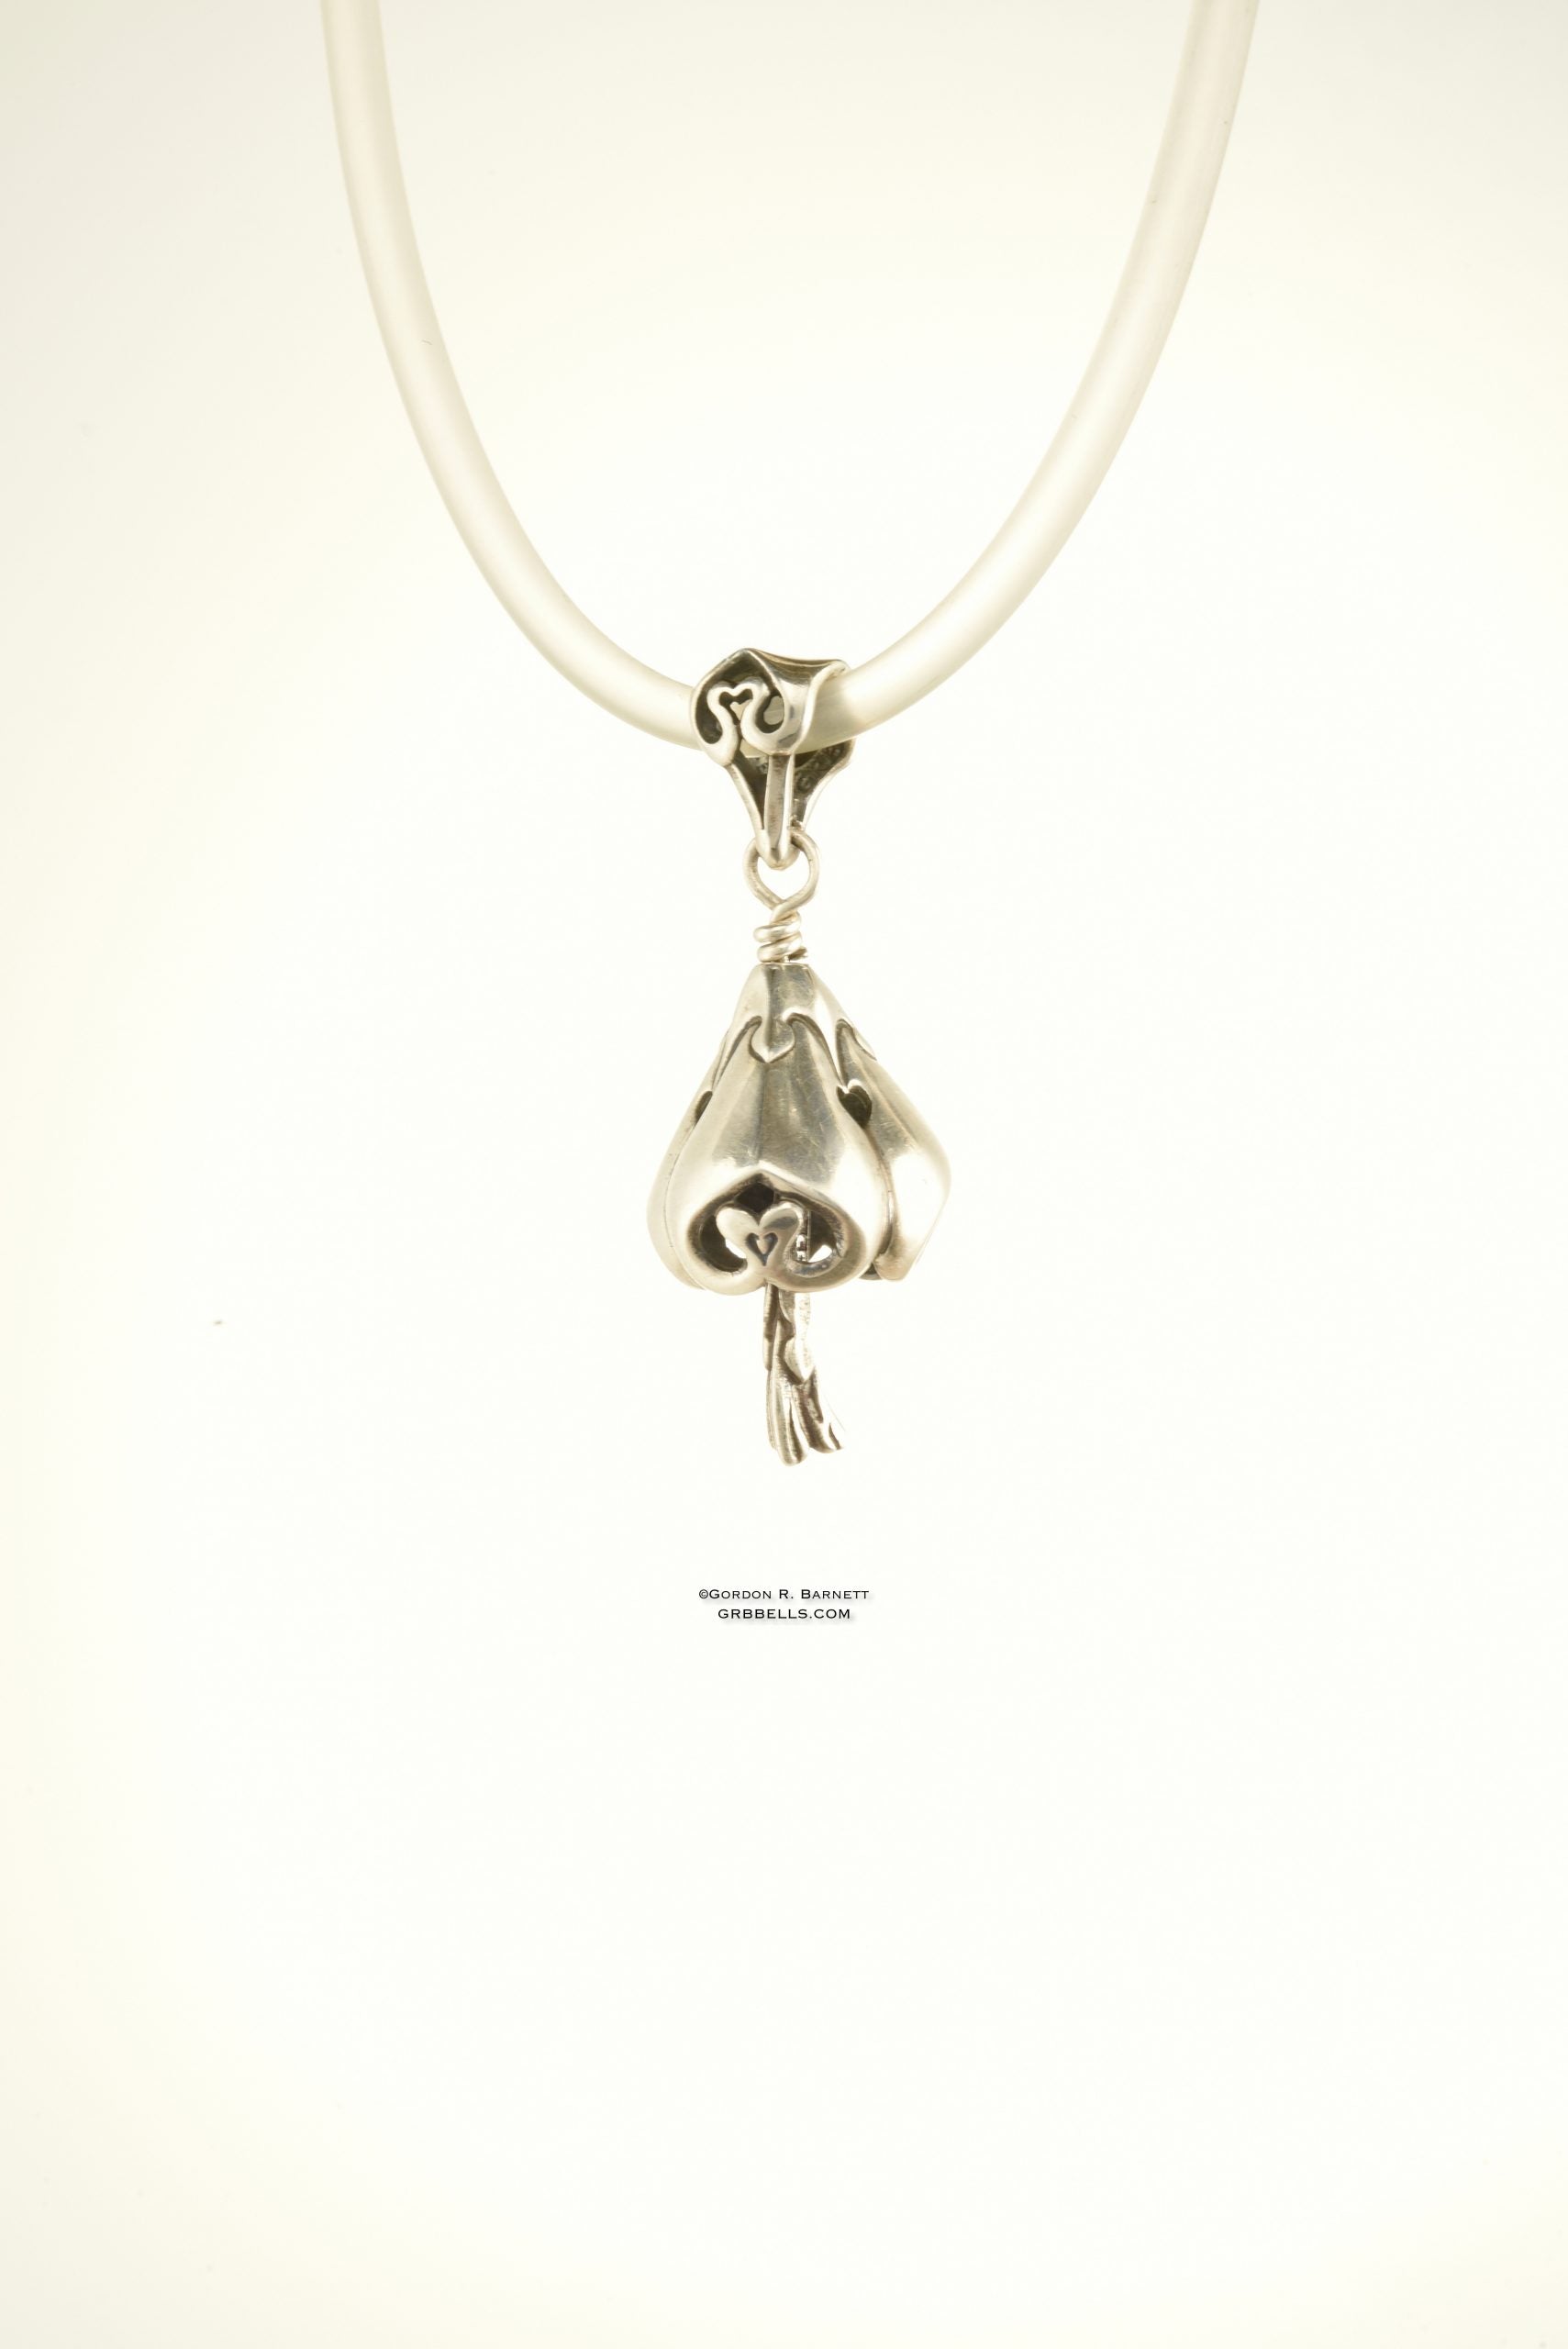 jewelry bell necklace in sterling silver is handmade pendant is made with lost wax casting, then polished and assembled in Washington state perfect gift for young lovel